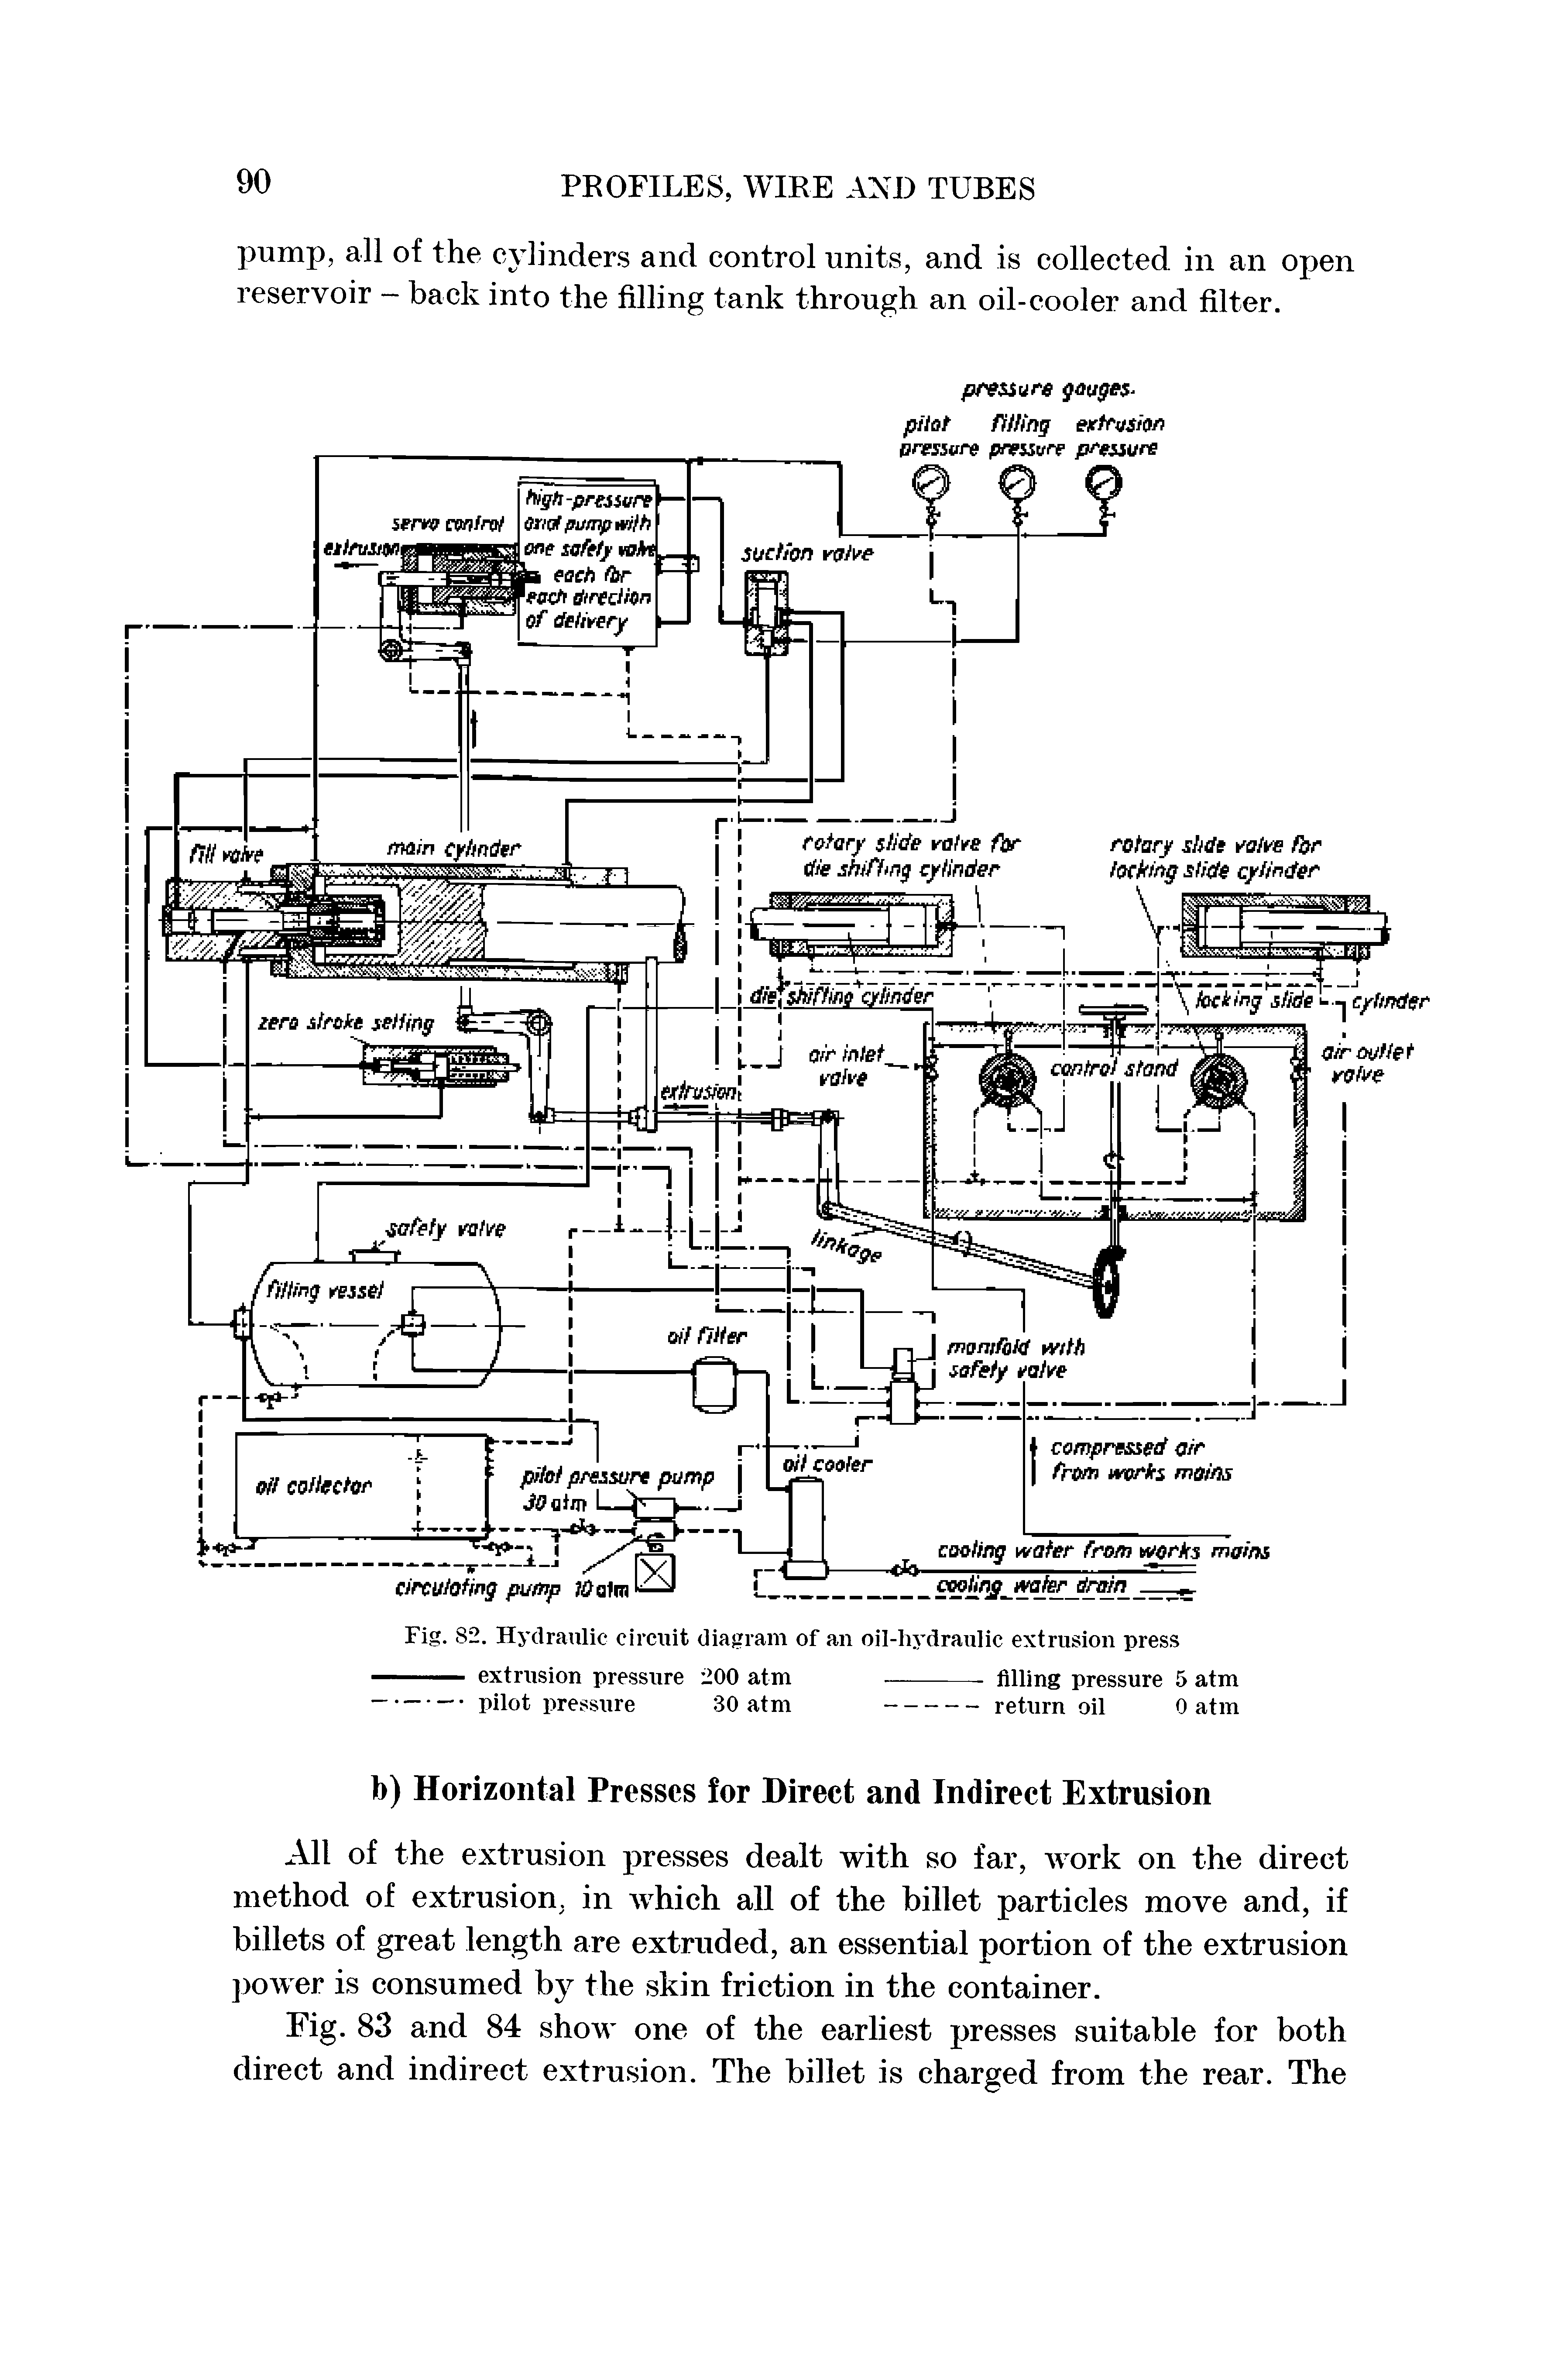 Fig. 82. Hydraulic circuit diagram of an oil-hj draulic extrusion press...